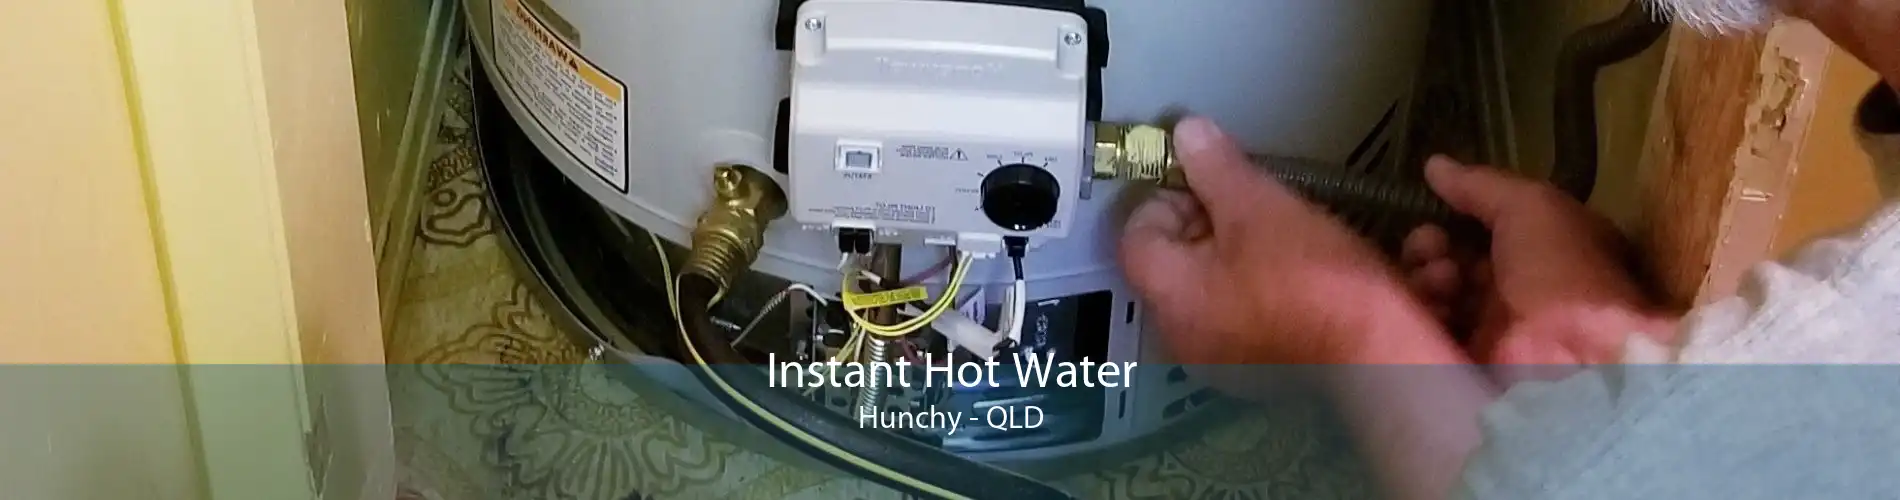 Instant Hot Water Hunchy - QLD